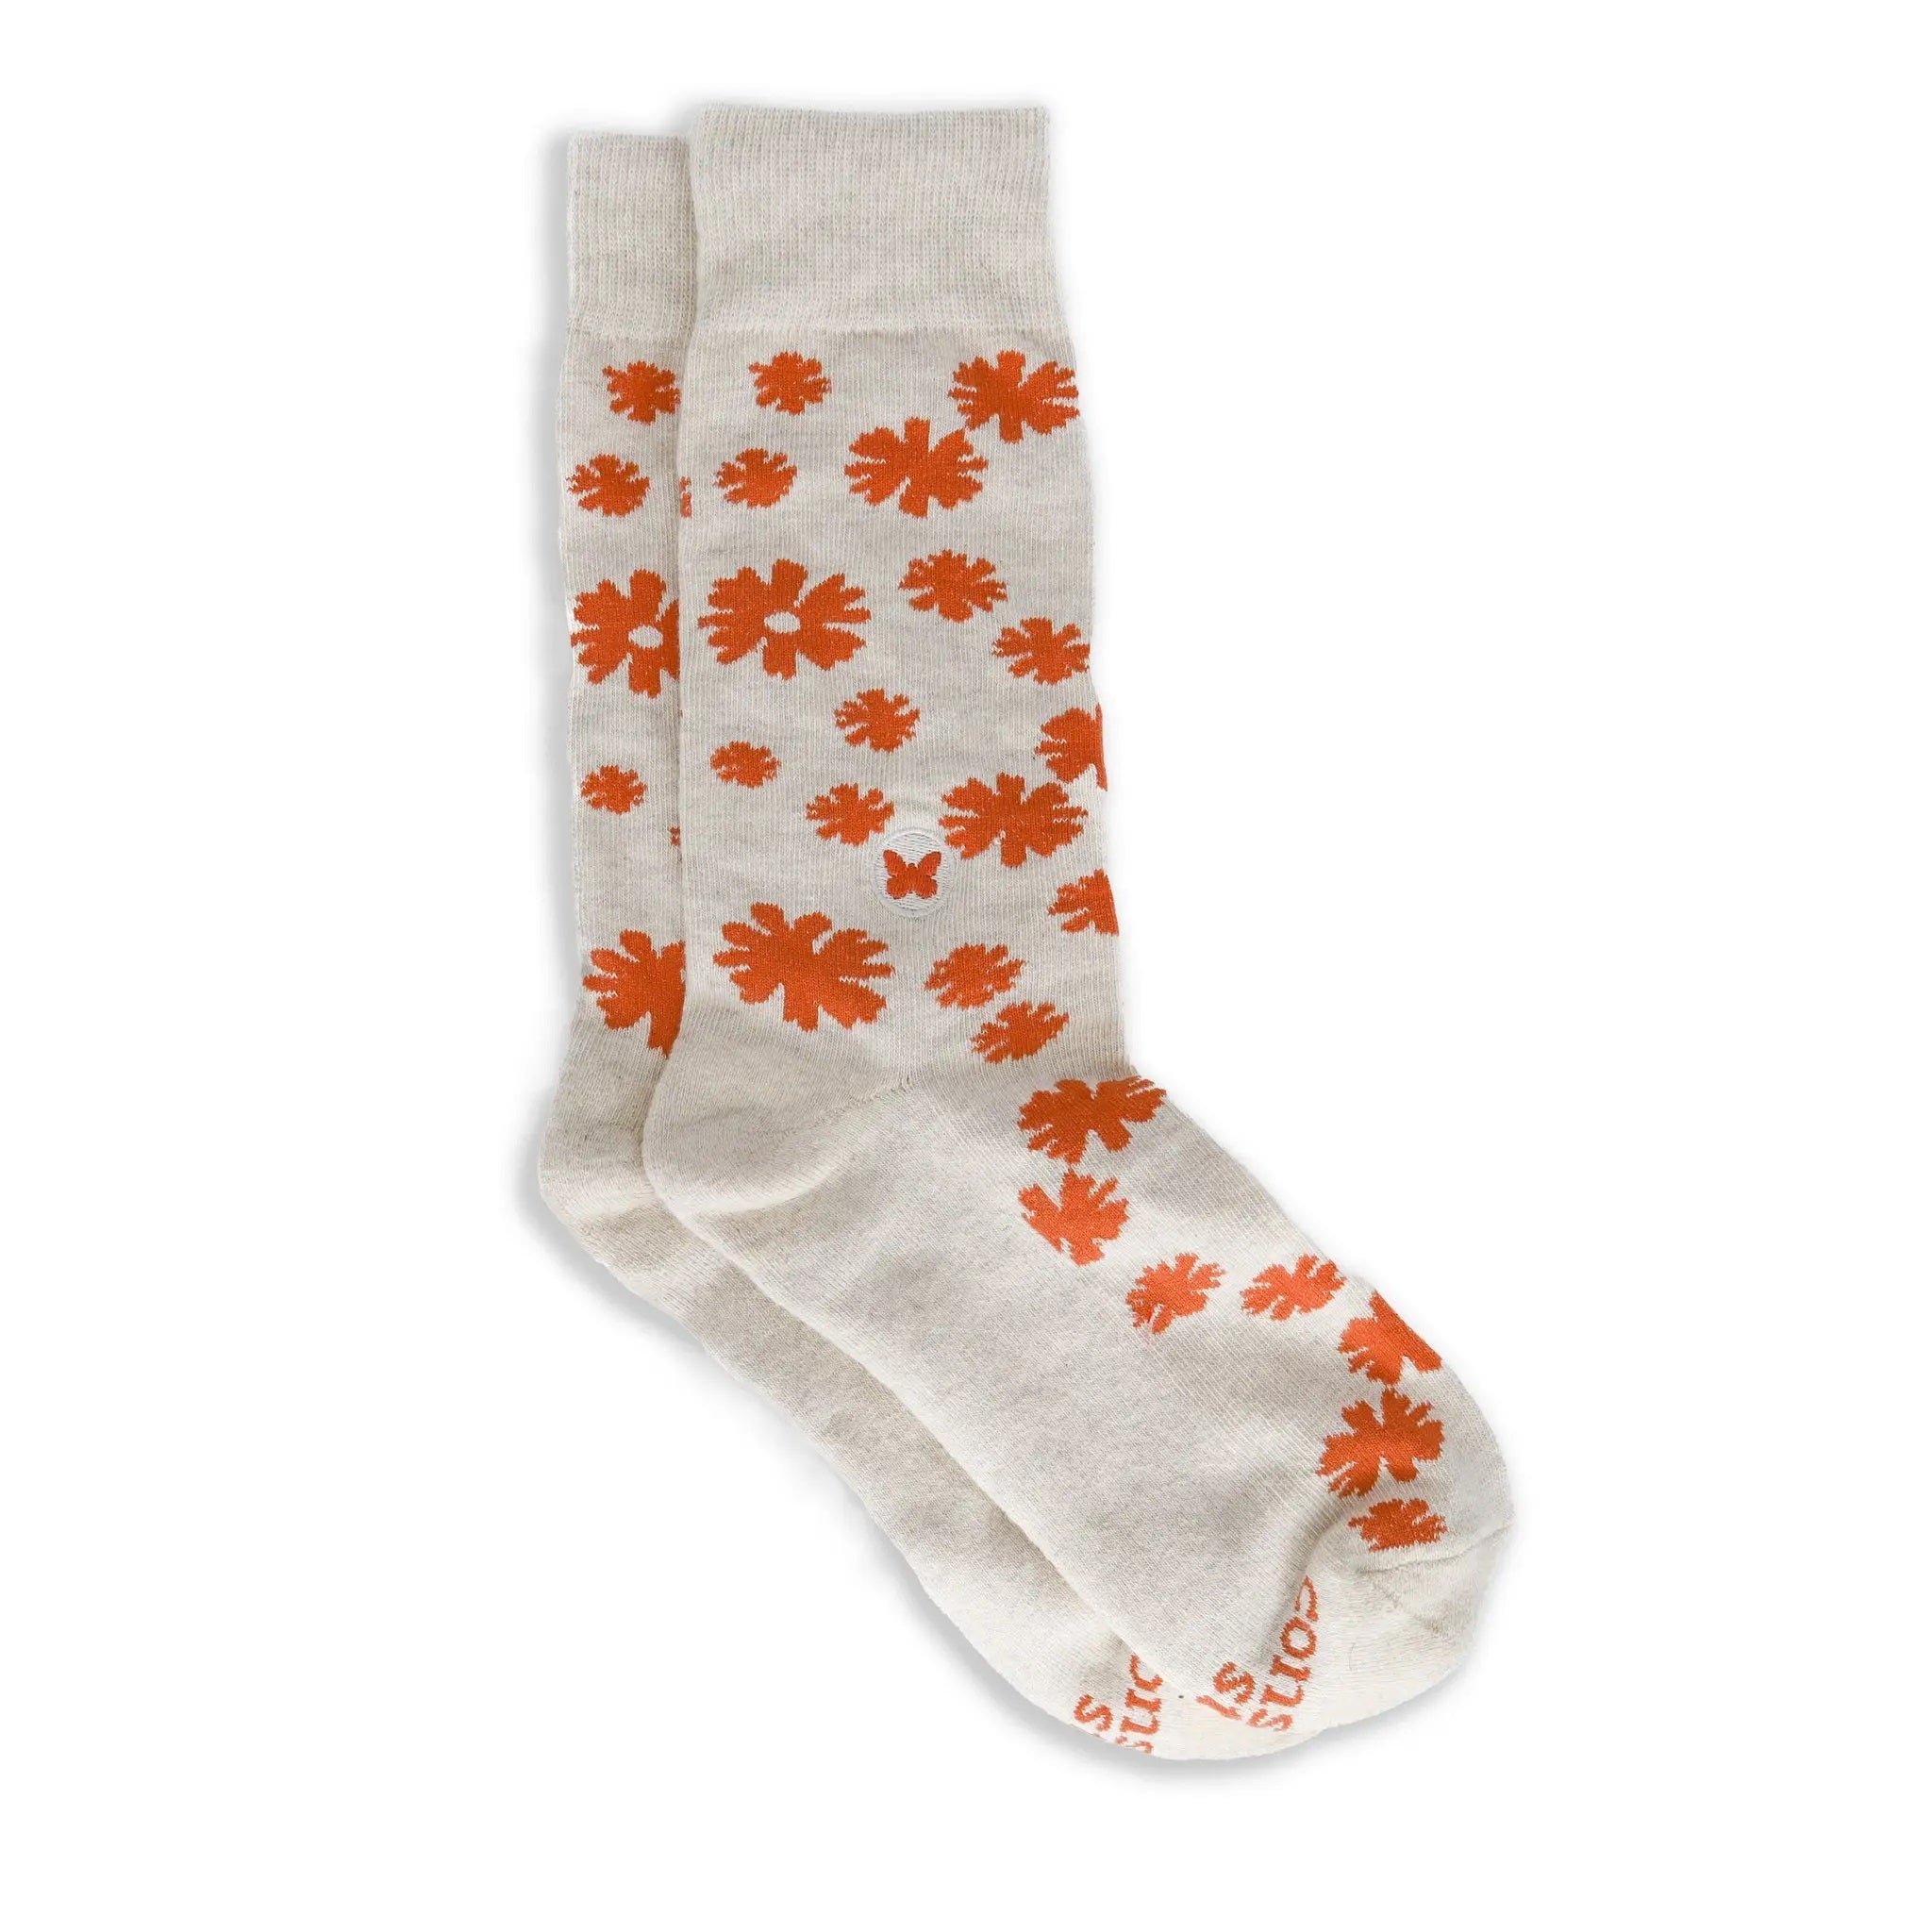 Conscious Step, Socks That Build Homes - Busy Bees – Boutique Dandelion